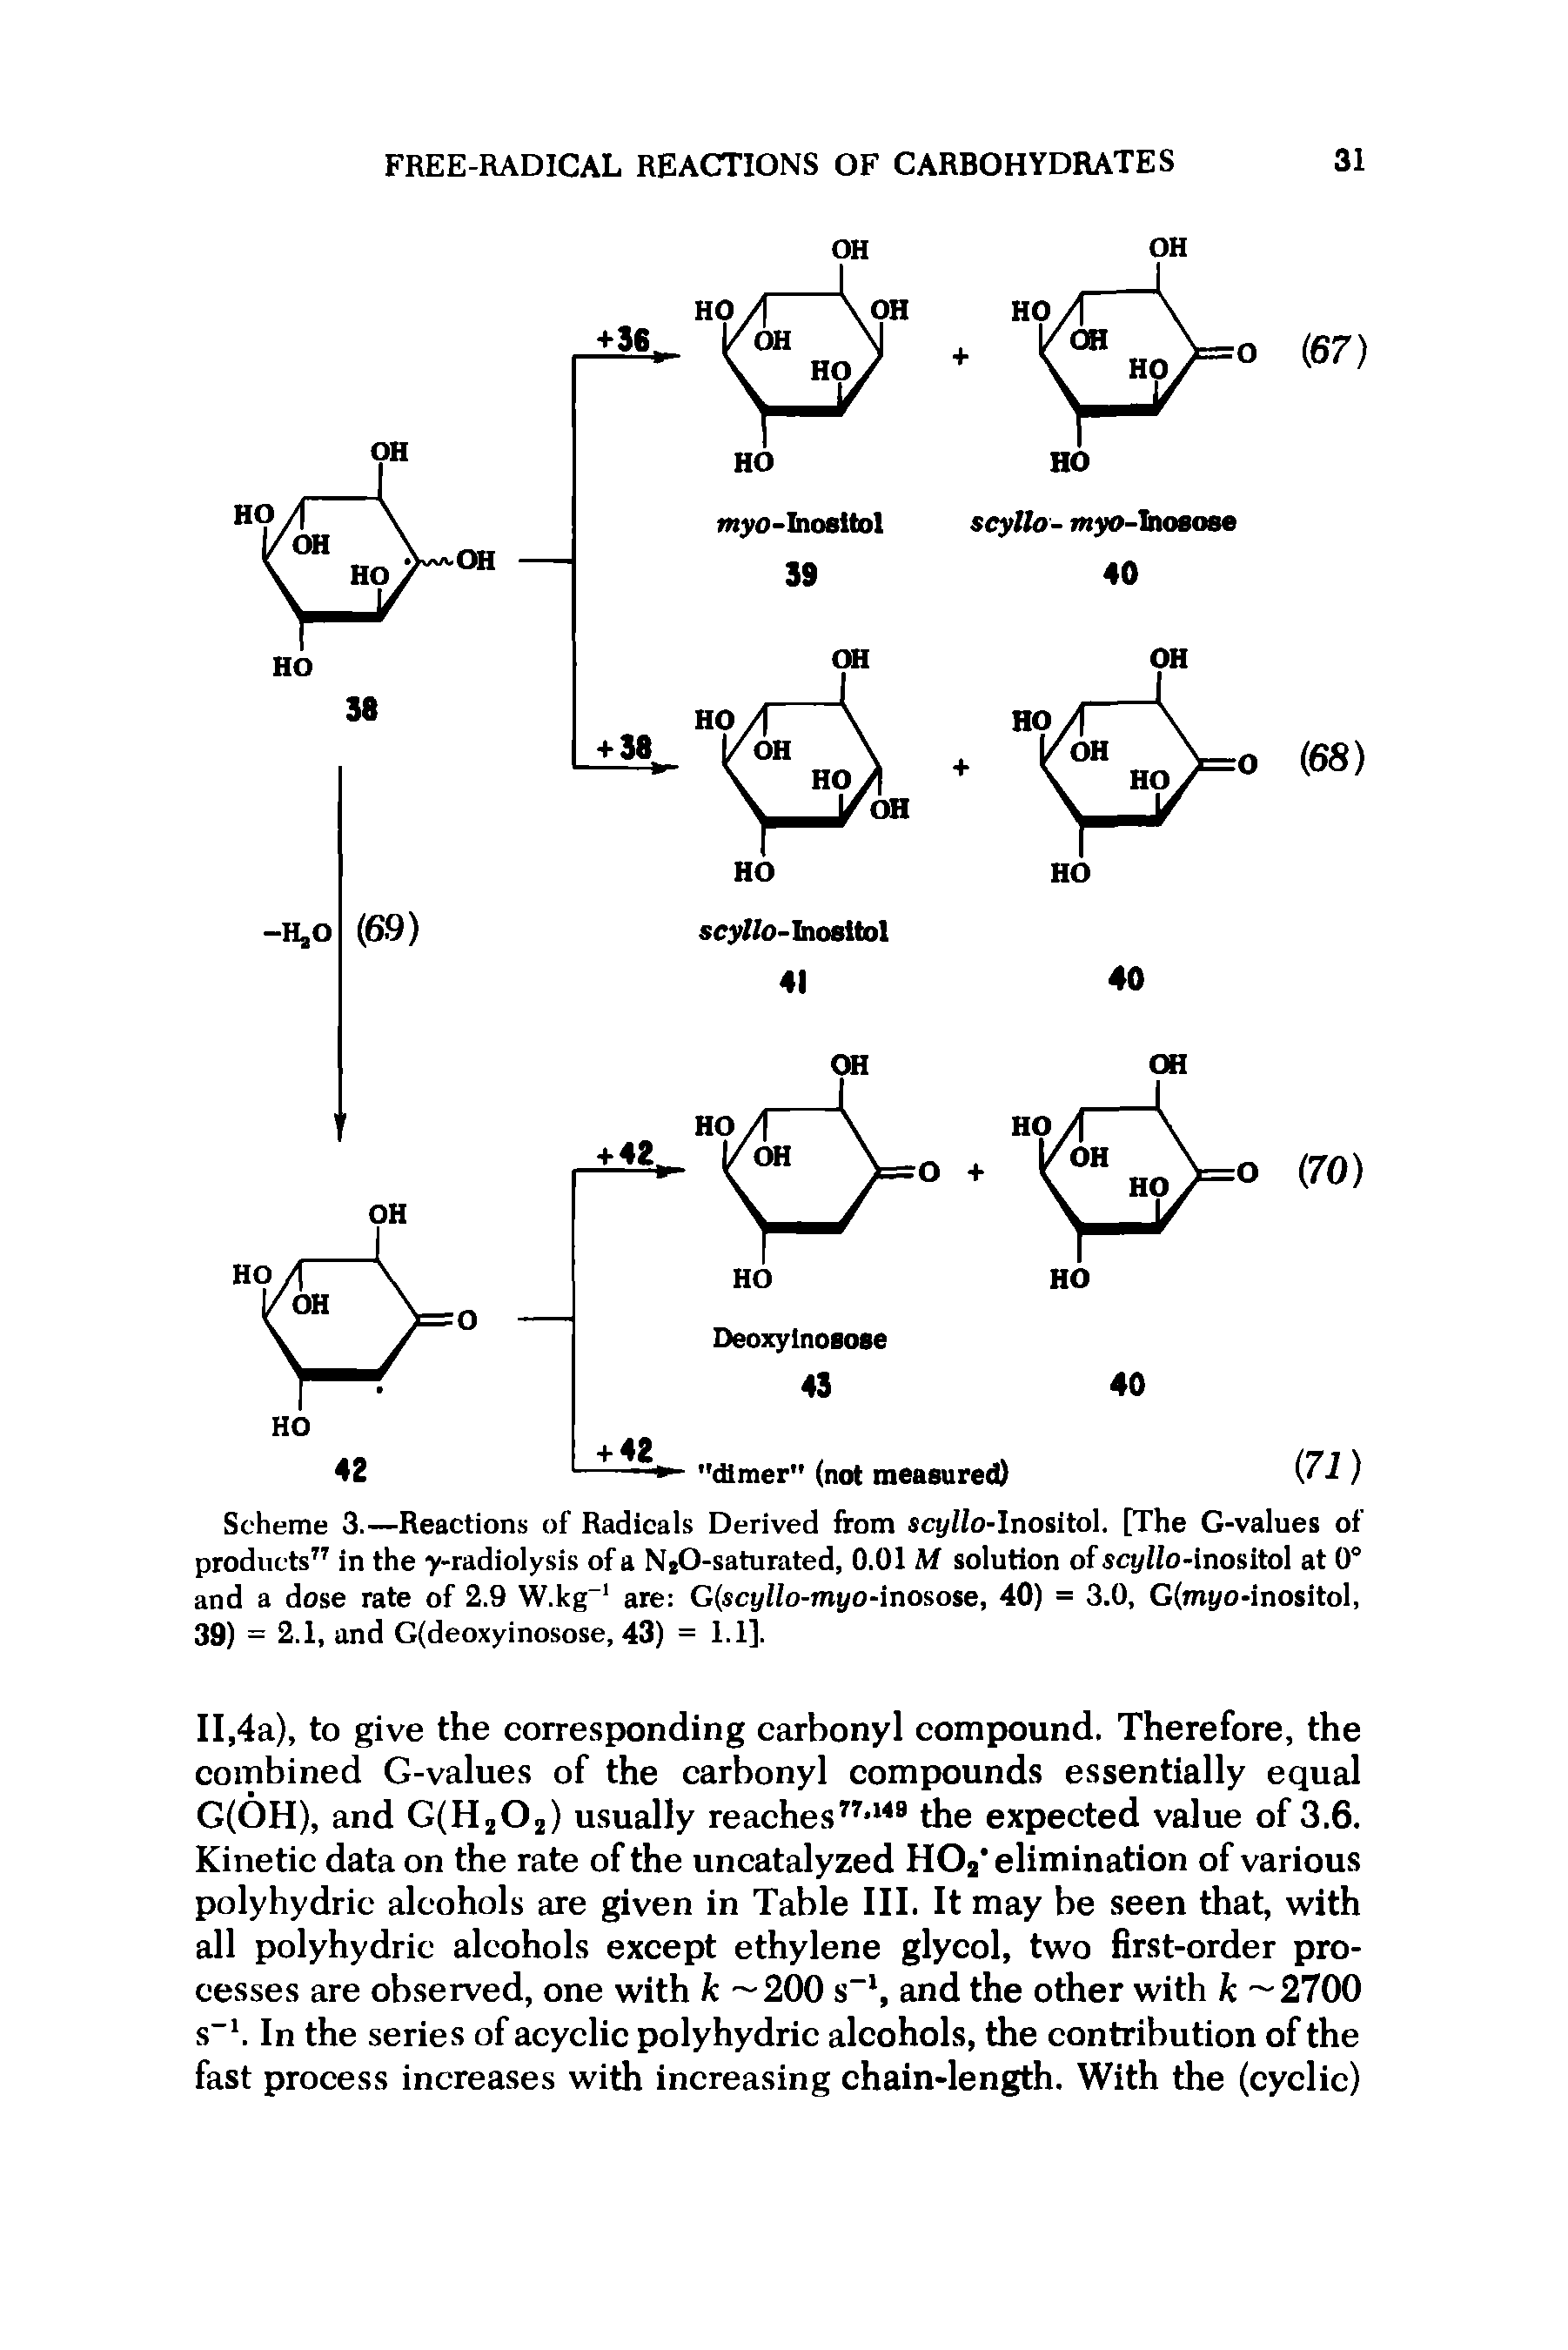 Scheme 3.—Reactions of Radicals Derived from scyllo-Inositol. [The G-values of products77 in the y-radiolysis of a NjO-saturated, 0.01 M solution of scyllo-inositol at 0° and a dose rate of 2.9 W.kg-1 are G(scy//o-myo-inosose, 40) = 3.0, G(myo-inositol, 39) = 2.1, and G(deoxyinosose, 43) = 1.1].